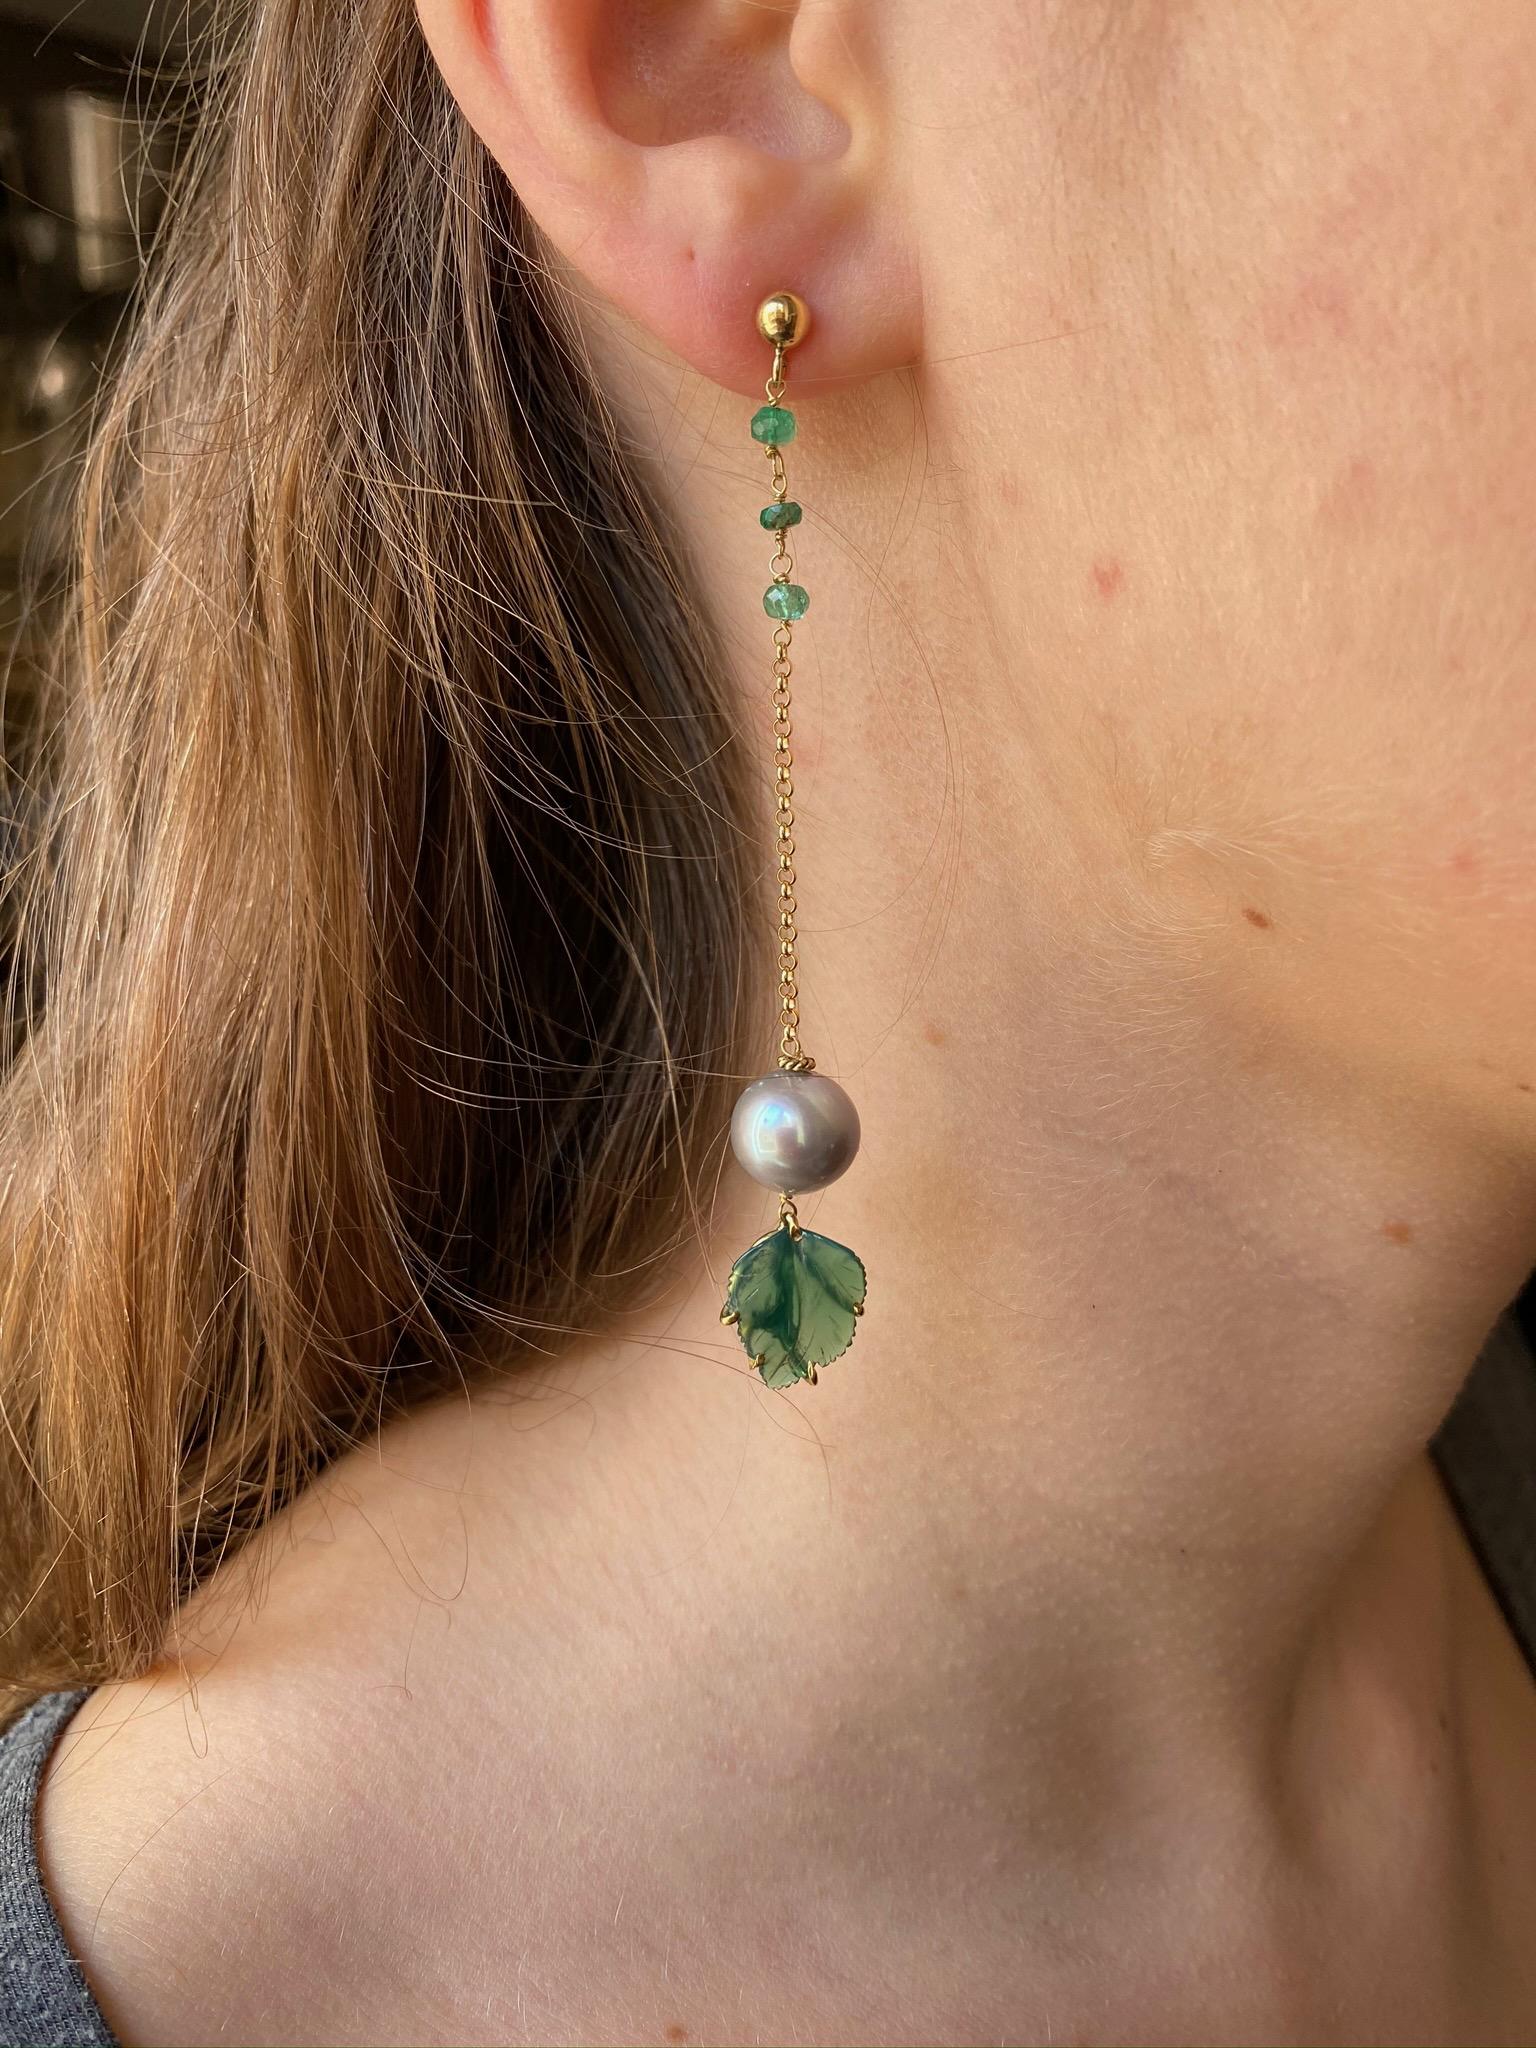 Rossella Ugolini Design Collection,  Handcrafted earrings in 18 Karat Yellow Gold 0.12 Karat Emerald beads and Green Agate leaves and grey pearls. 
The verdant splendor of nature finds its way into these magnificent earrings, crafted in 18k gold.